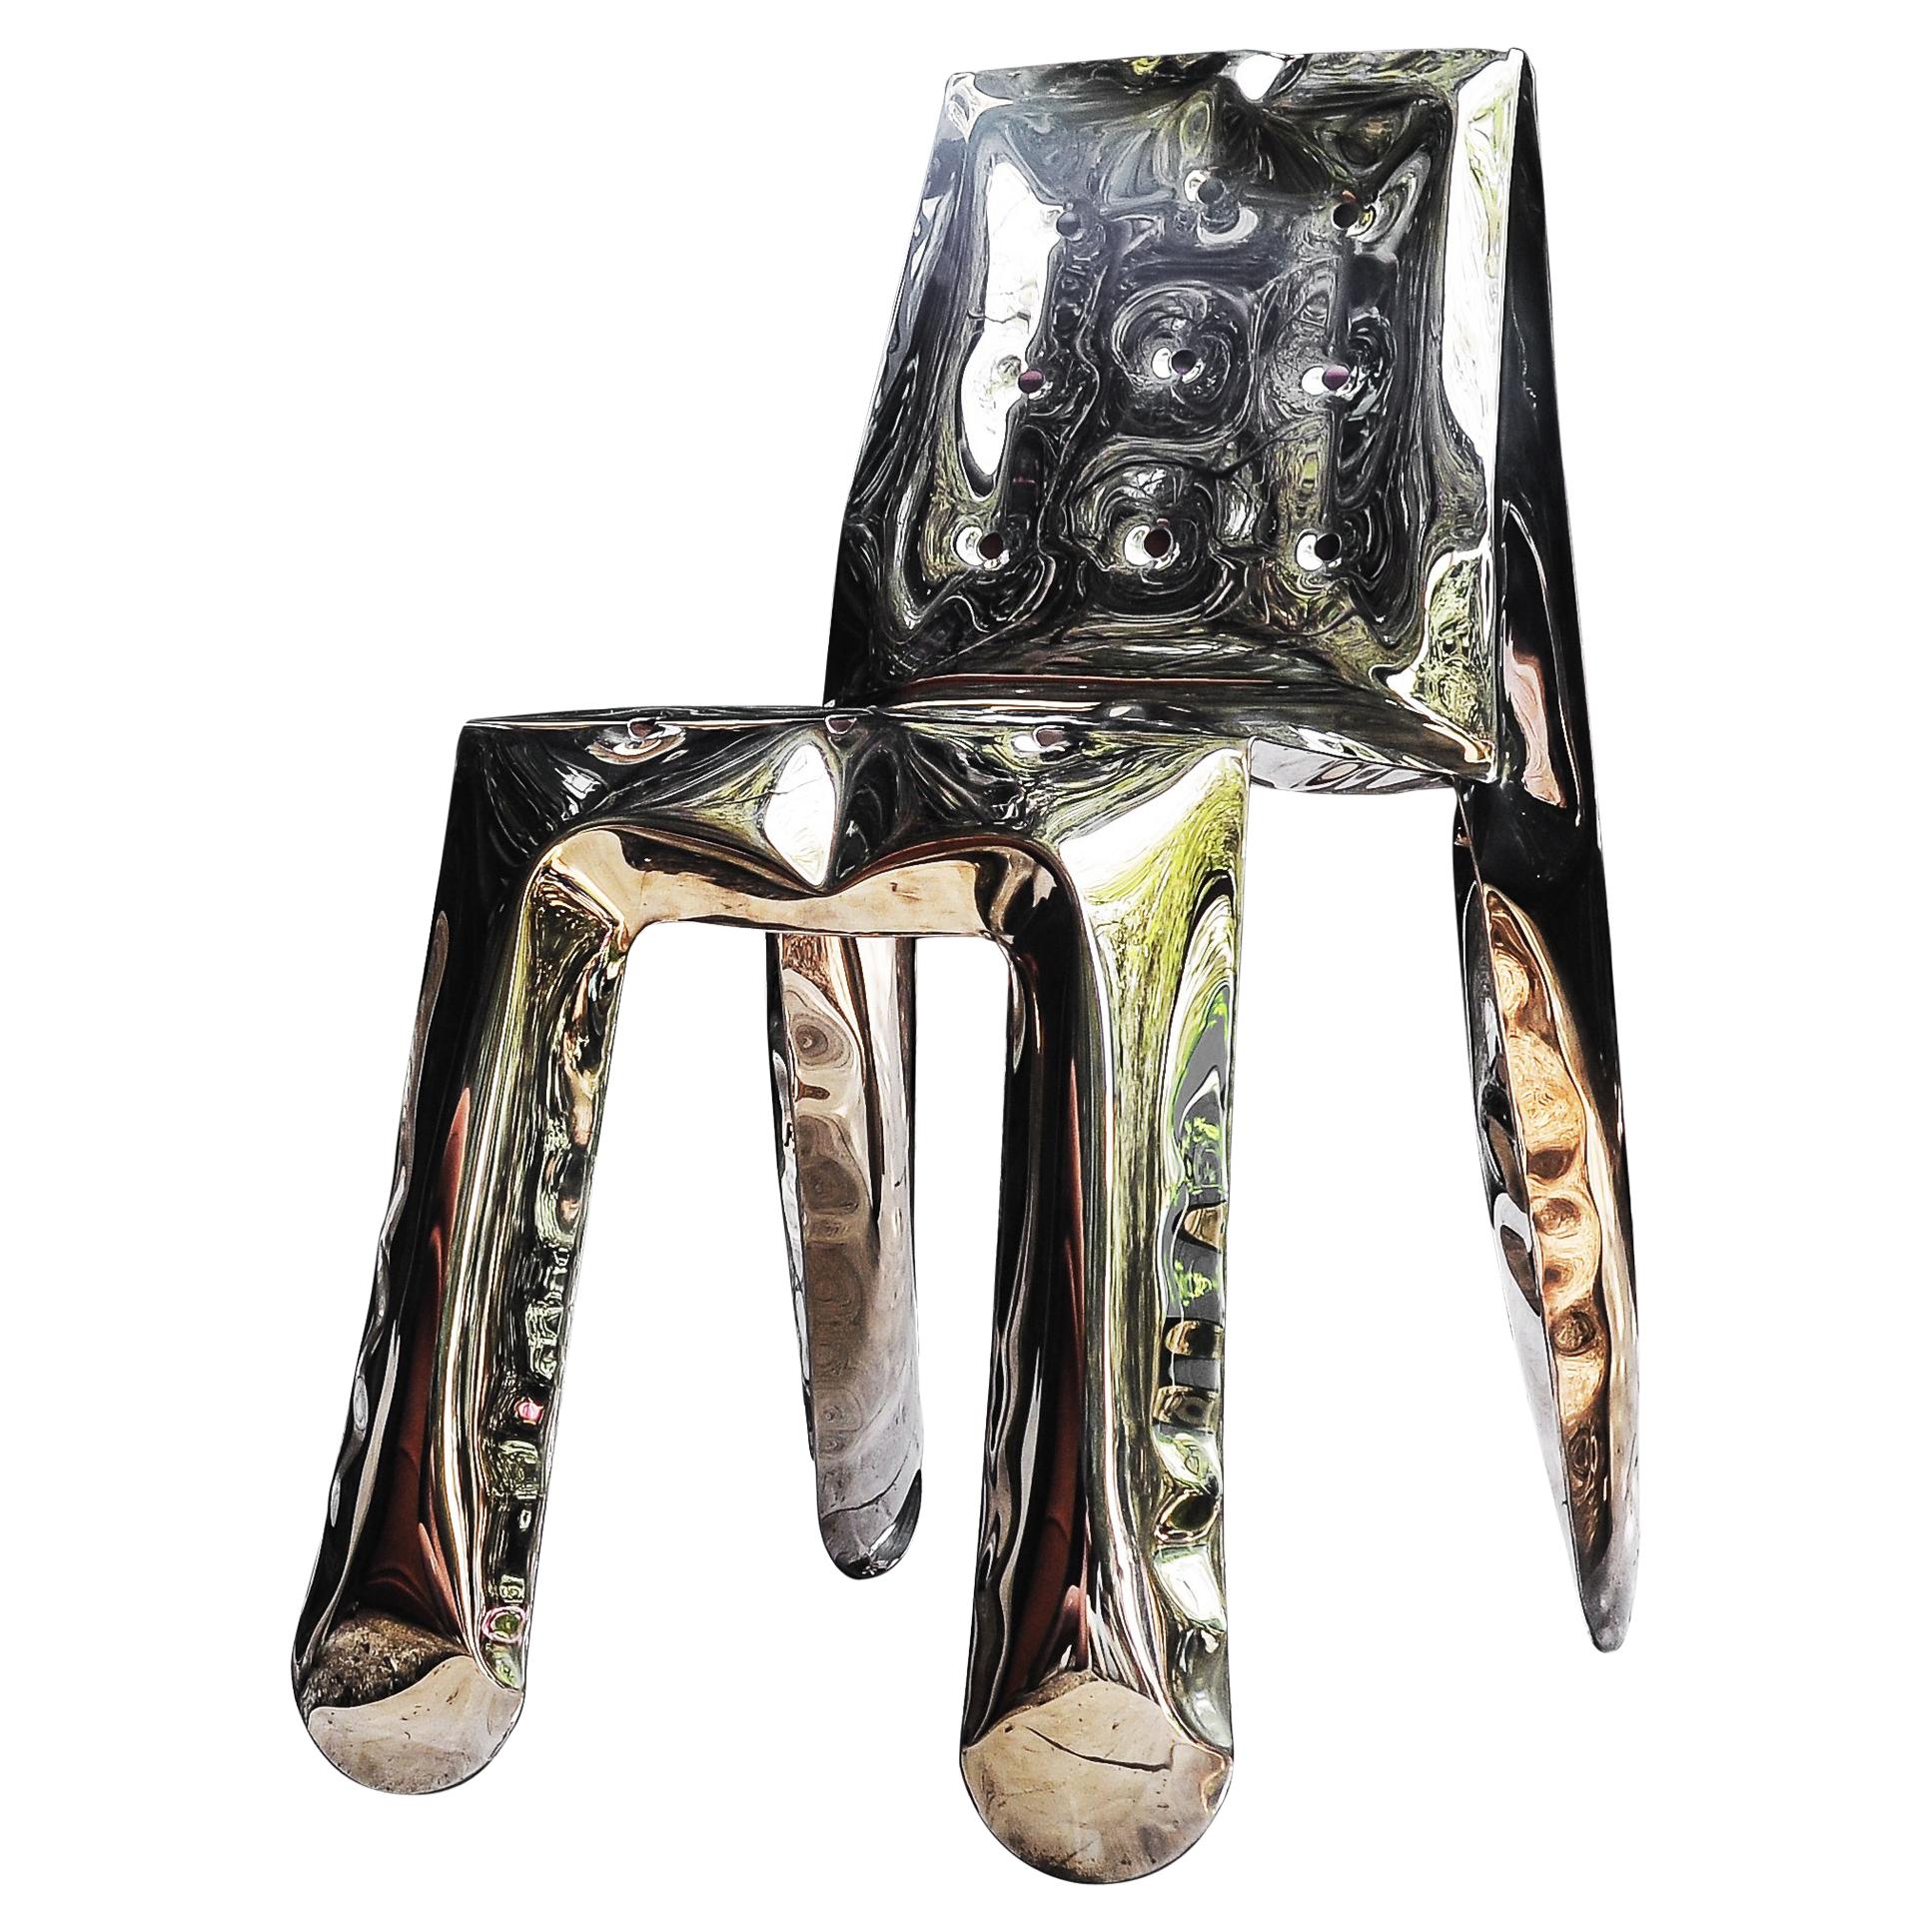 Heat Collection Chippensteel 1.0 Chair in Gold Stainless Steel by Zieta